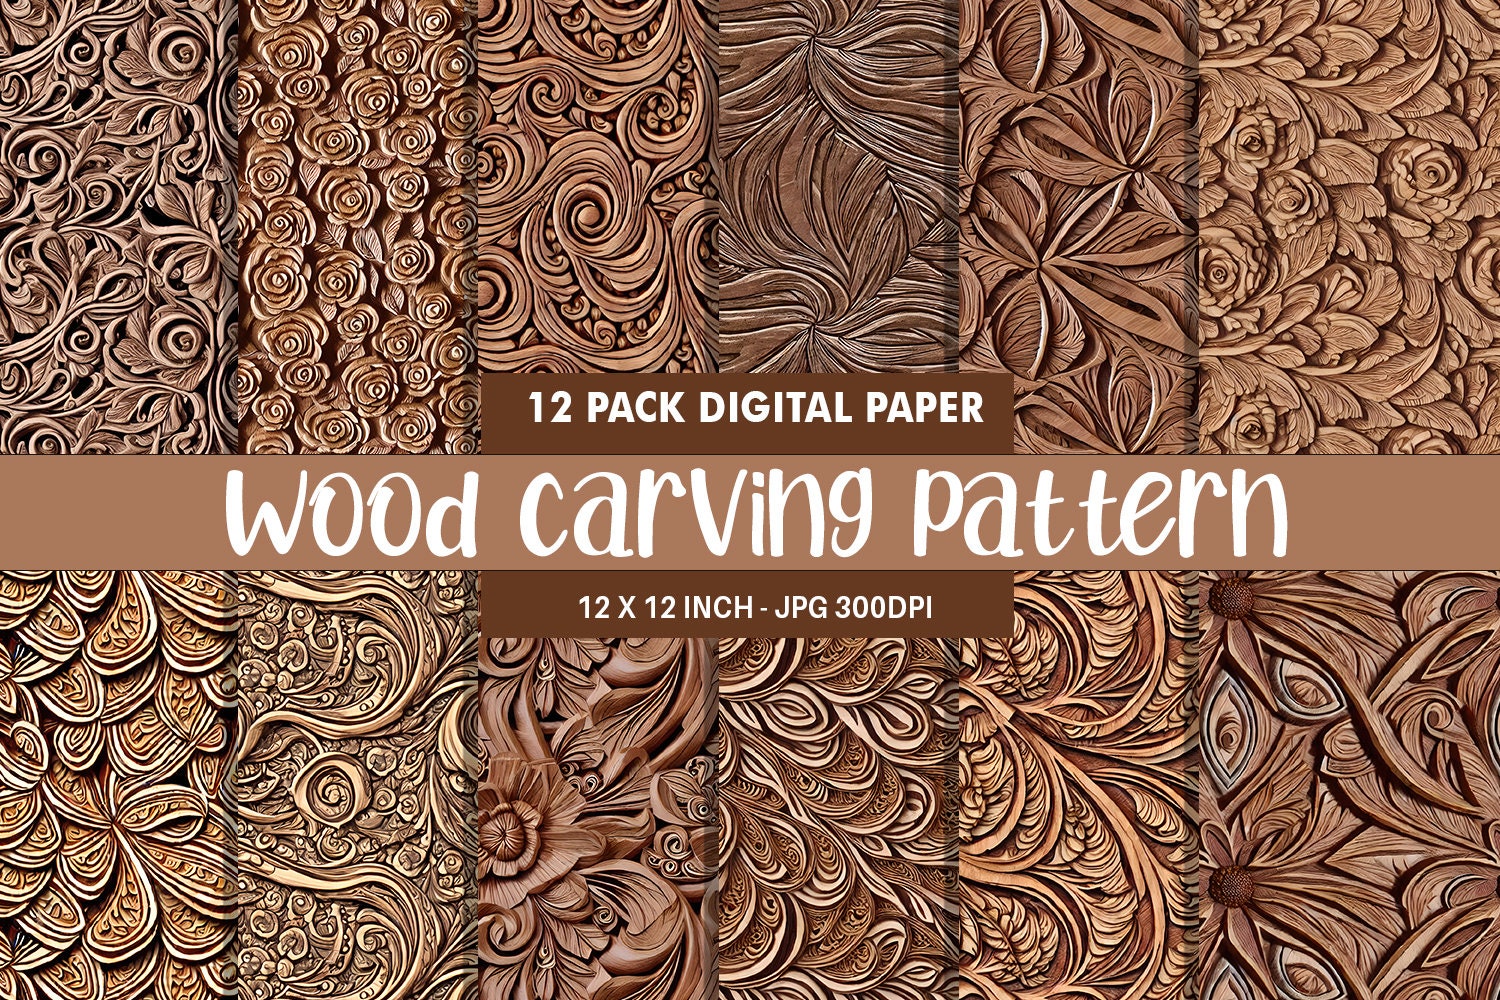 12 Awesome Whittling Photos  Simple wood carving, Wood carving patterns,  Chip carving